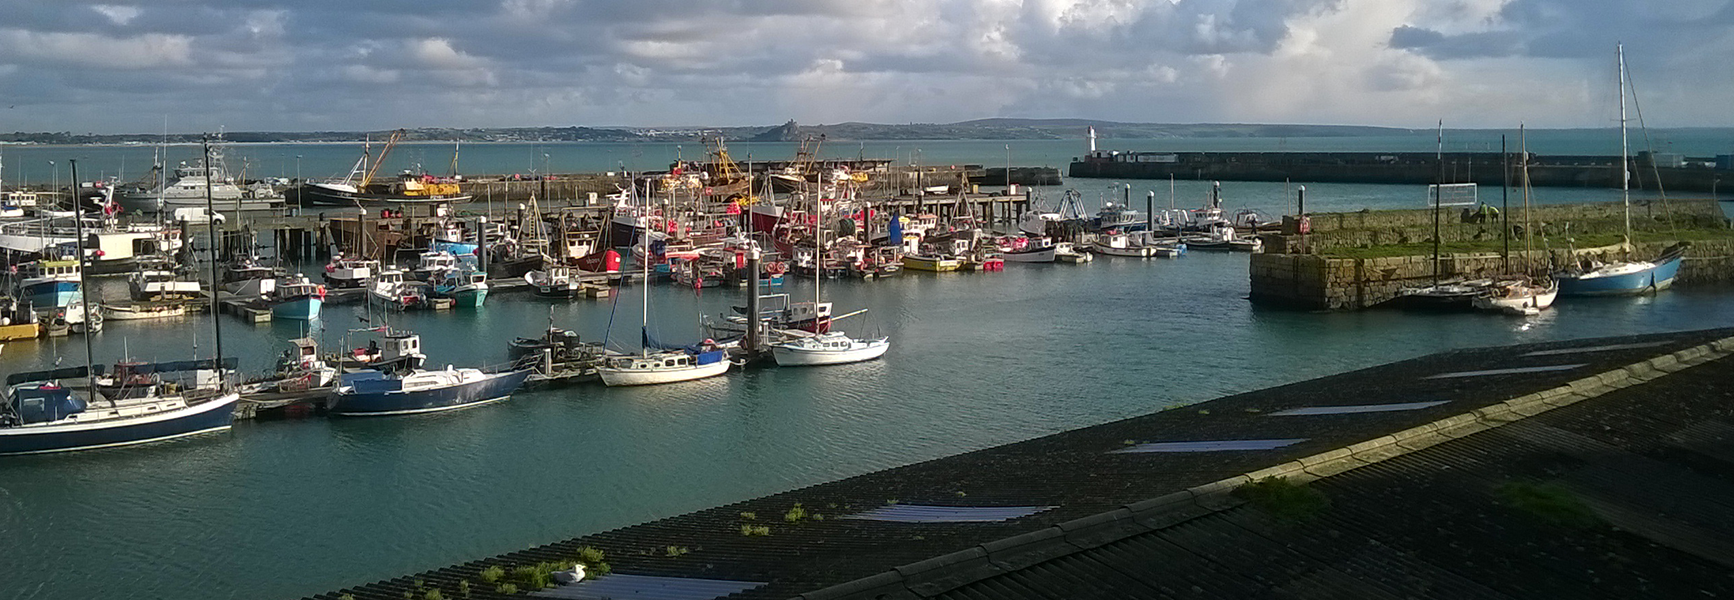 Photograph of Newlyn Harbour